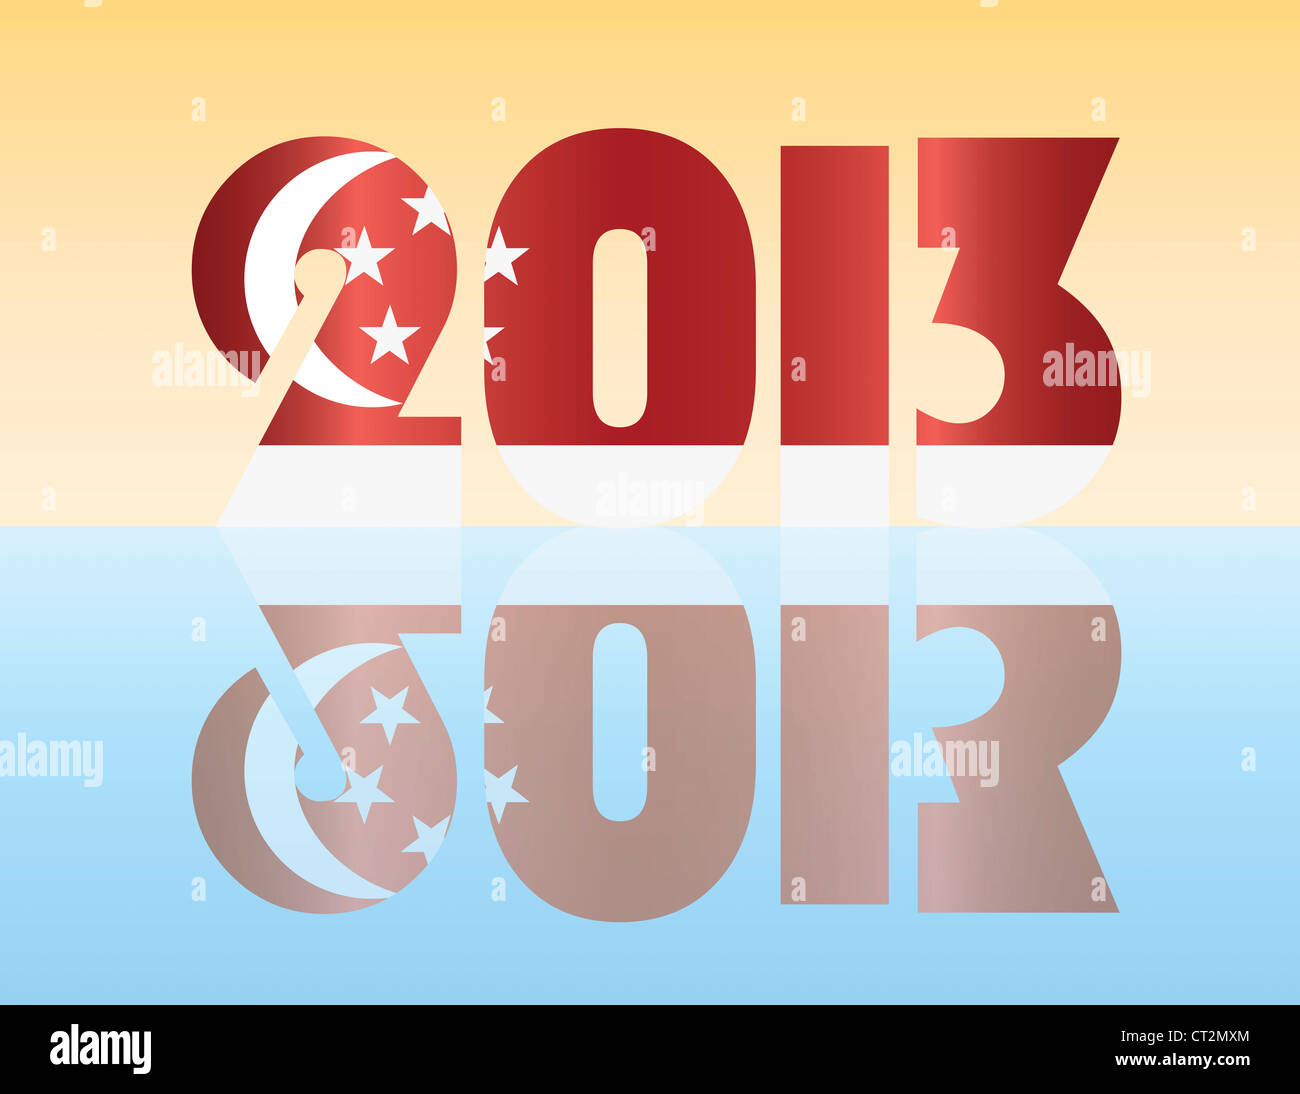 Happy New Year 2013 Silhouette with Singapore Flag Illustration Stock Photo